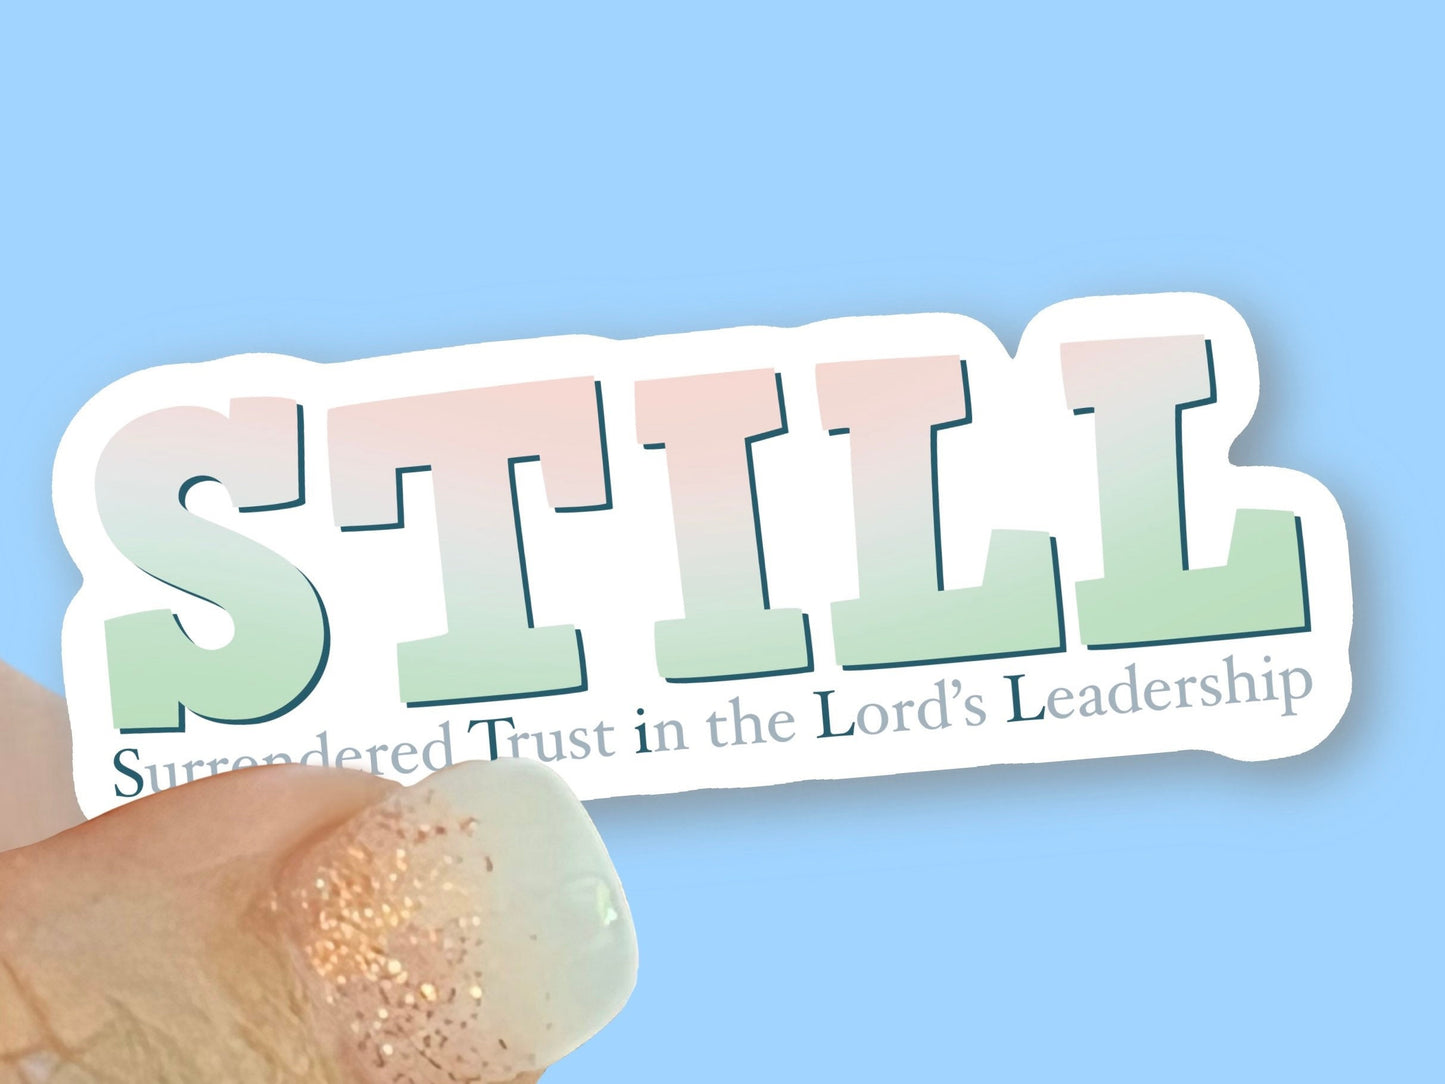 STILL - Surrendered Trust in the Lord’s Leadership - Christian Faith UV/ Waterproof Vinyl Sticker/ Decal- Choice of Size